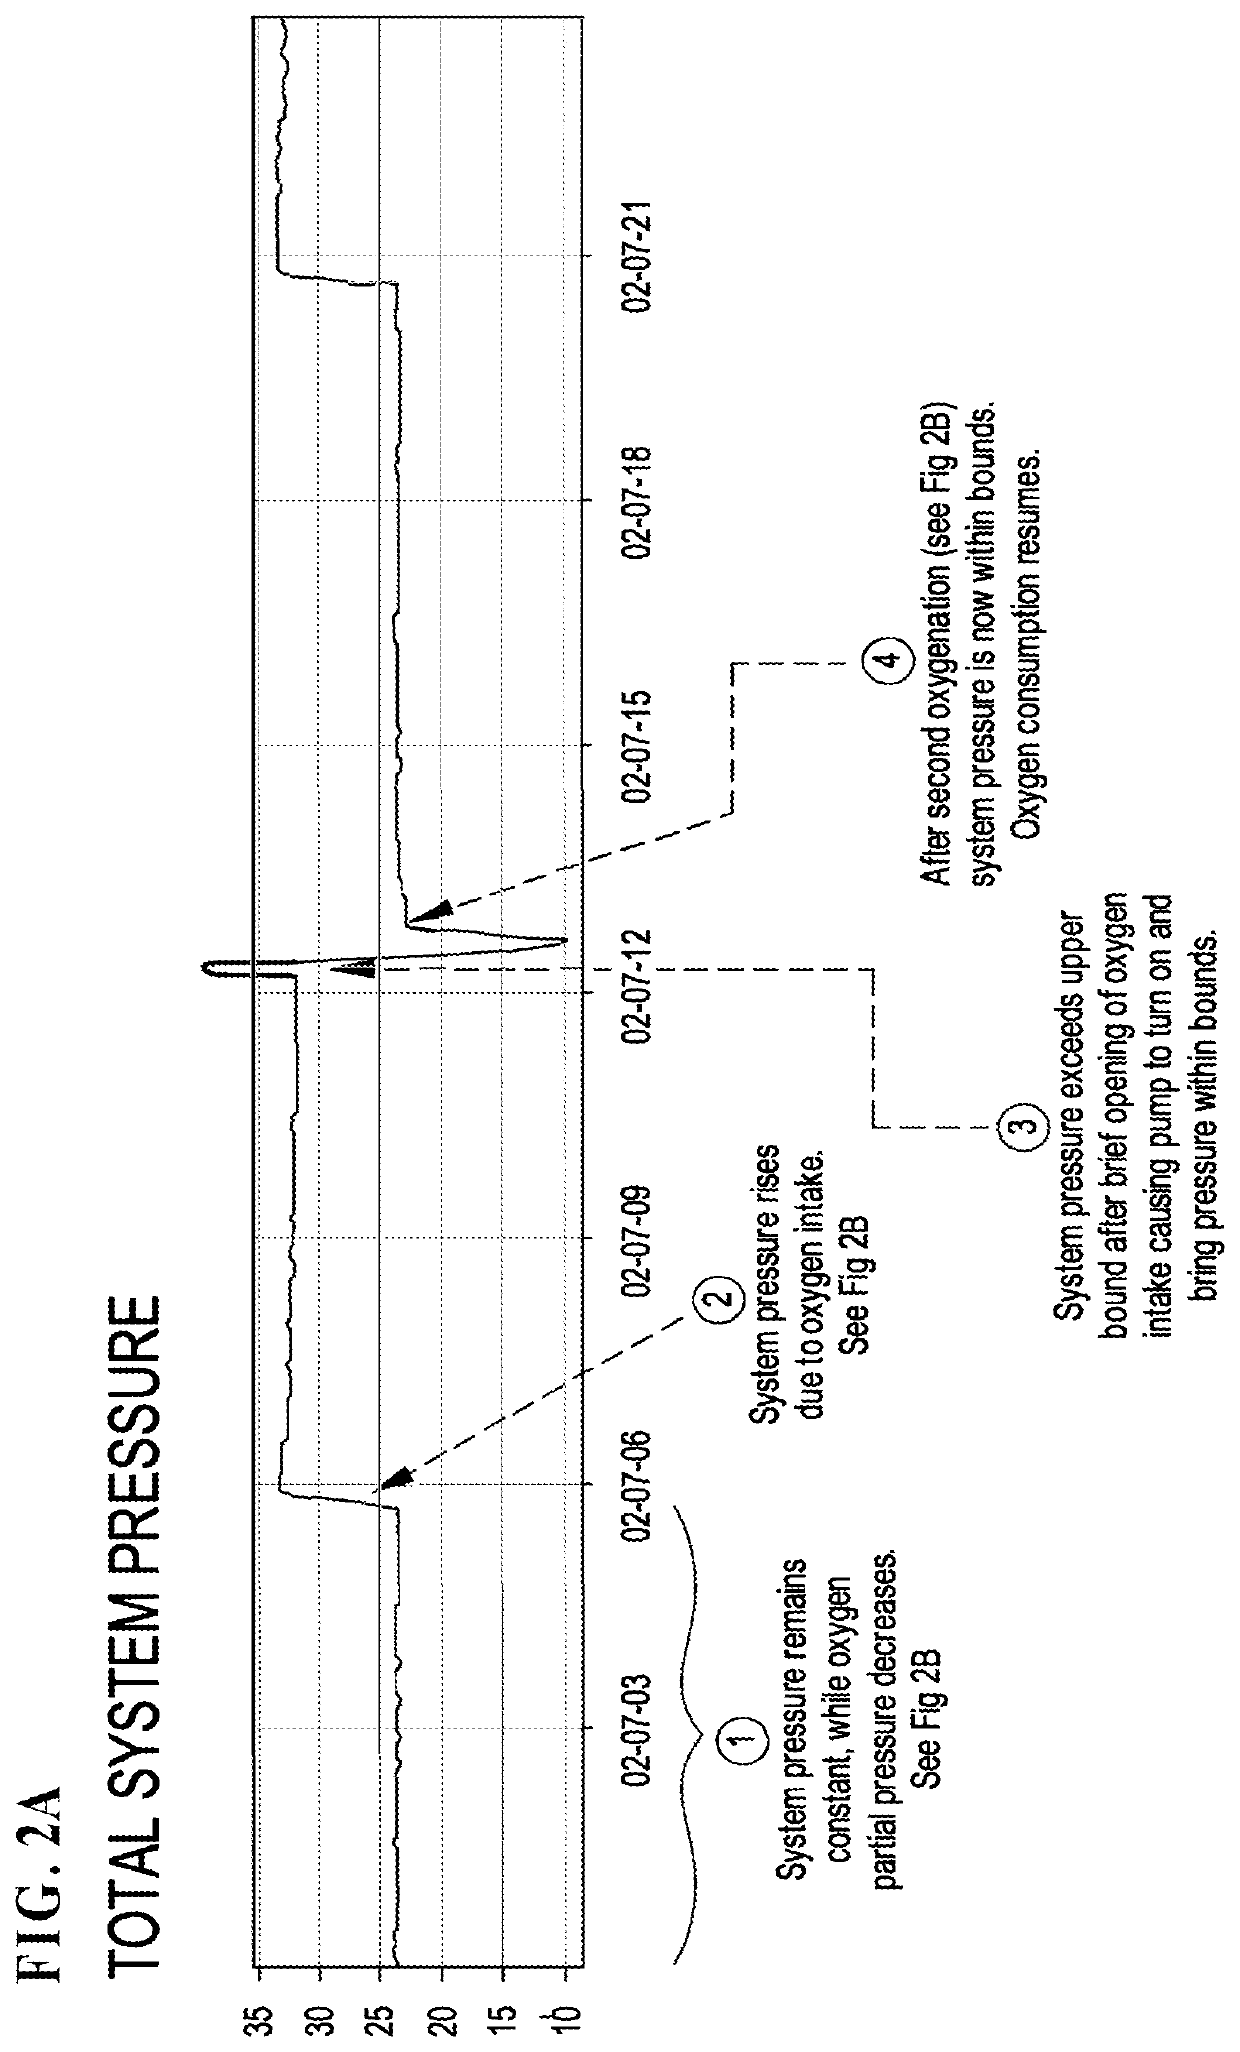 Vacuum storage of perishables and cyclindrical storage vessel method, system, and apparatus